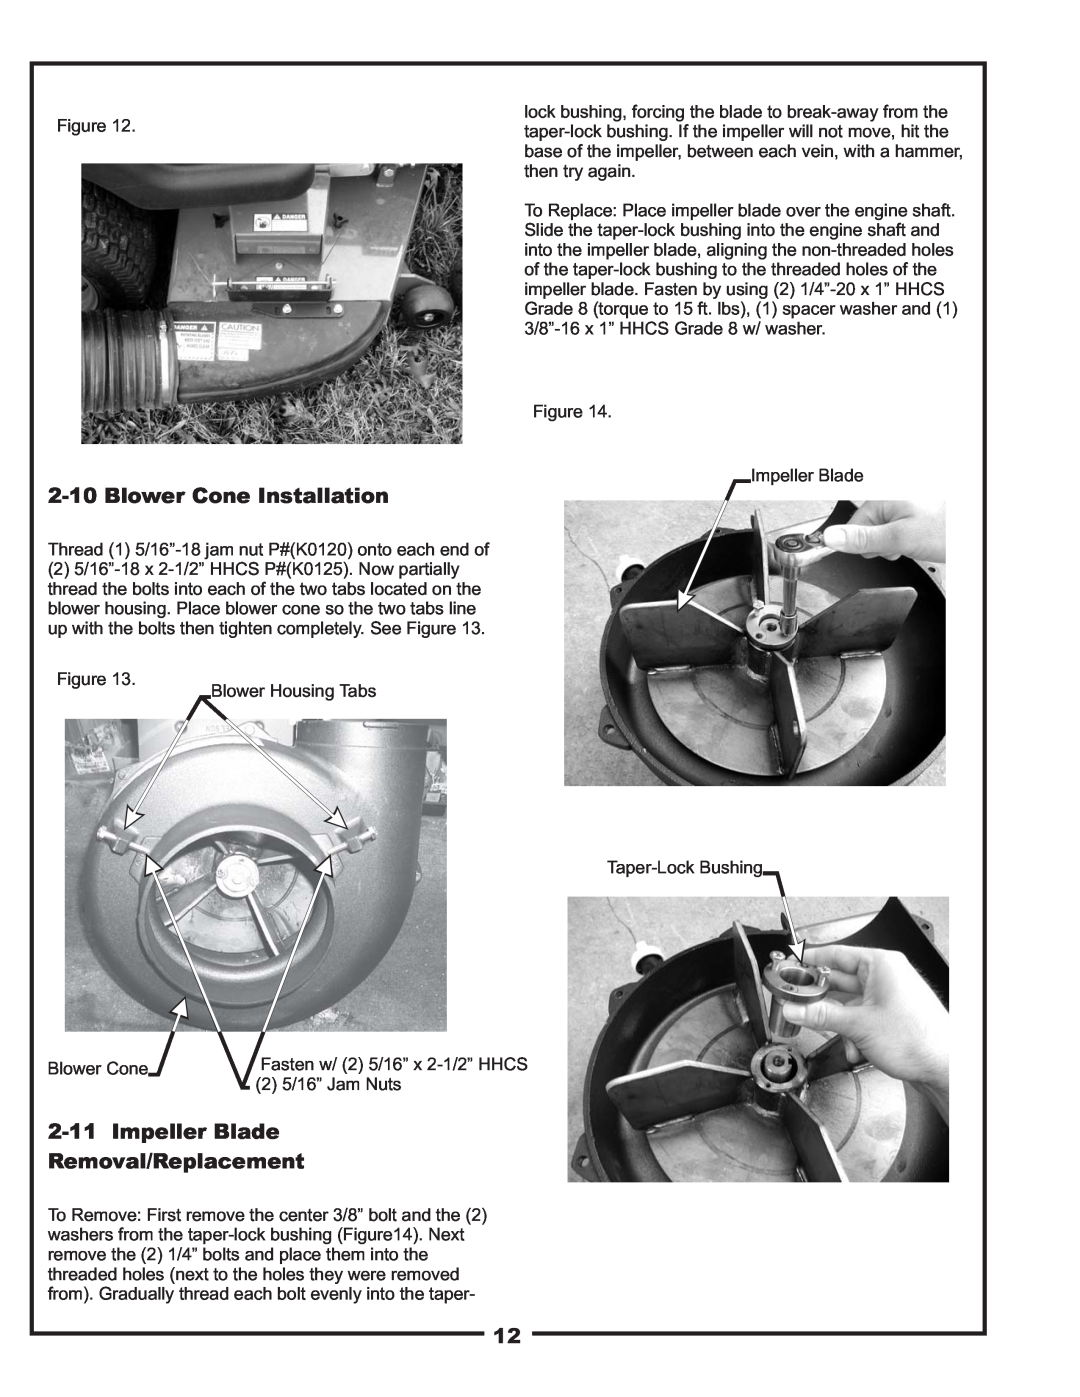 Bad Boy Mowers 48031001, PUP Series manual Blower Cone Installation, Impeller Blade Removal/Replacement 